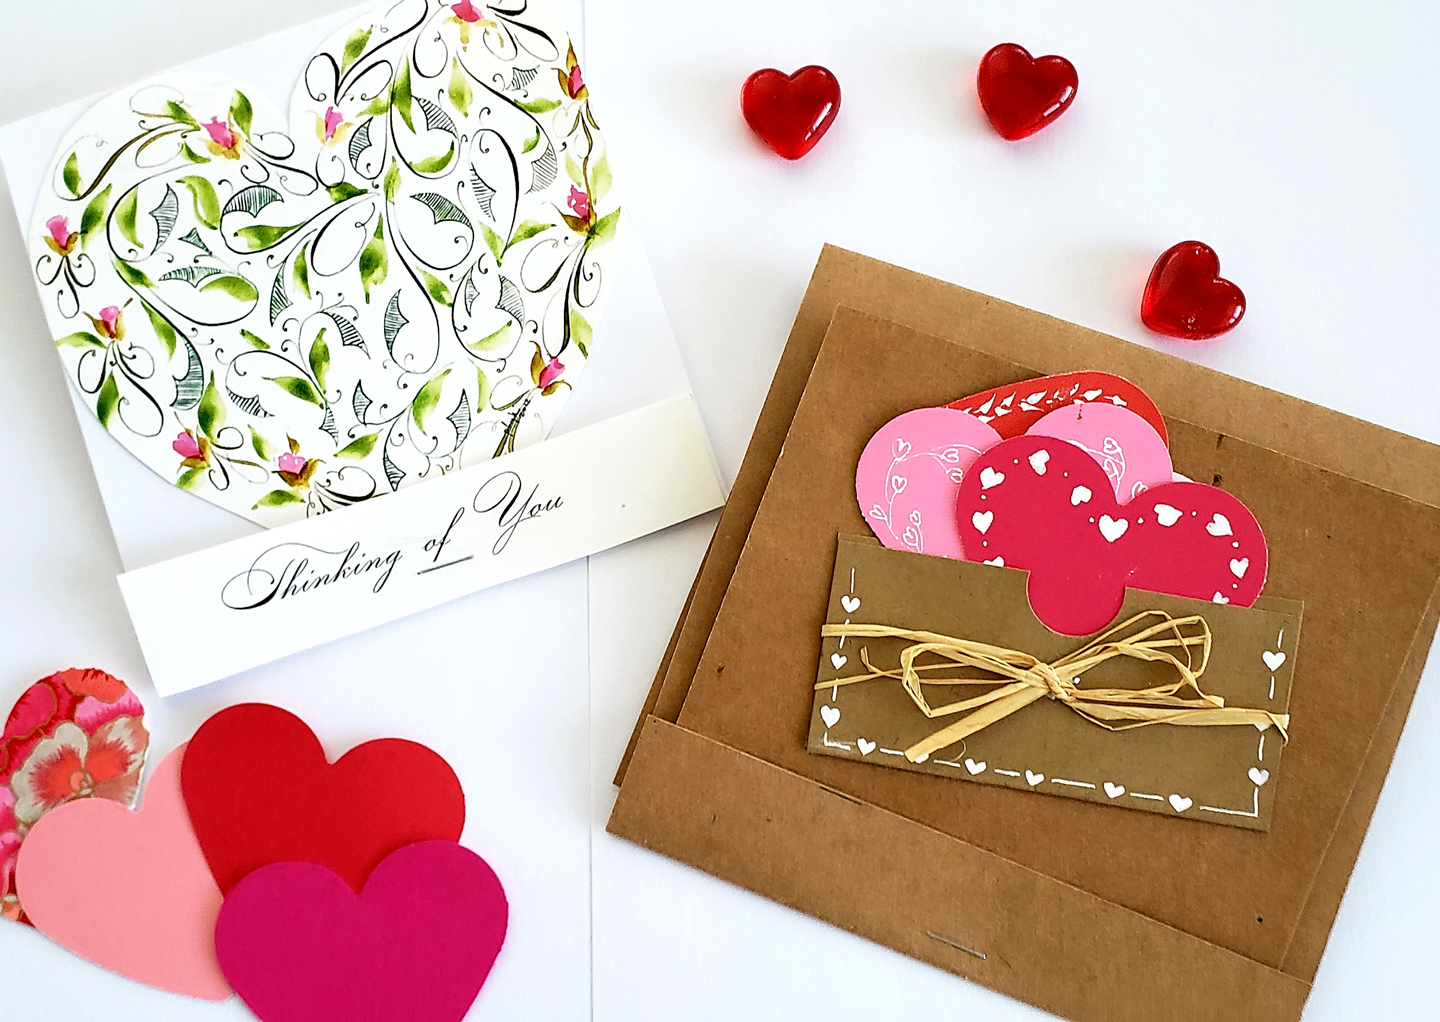 Matchbook Valentine’s Day Card Tutorial by Phyllis Macaluso